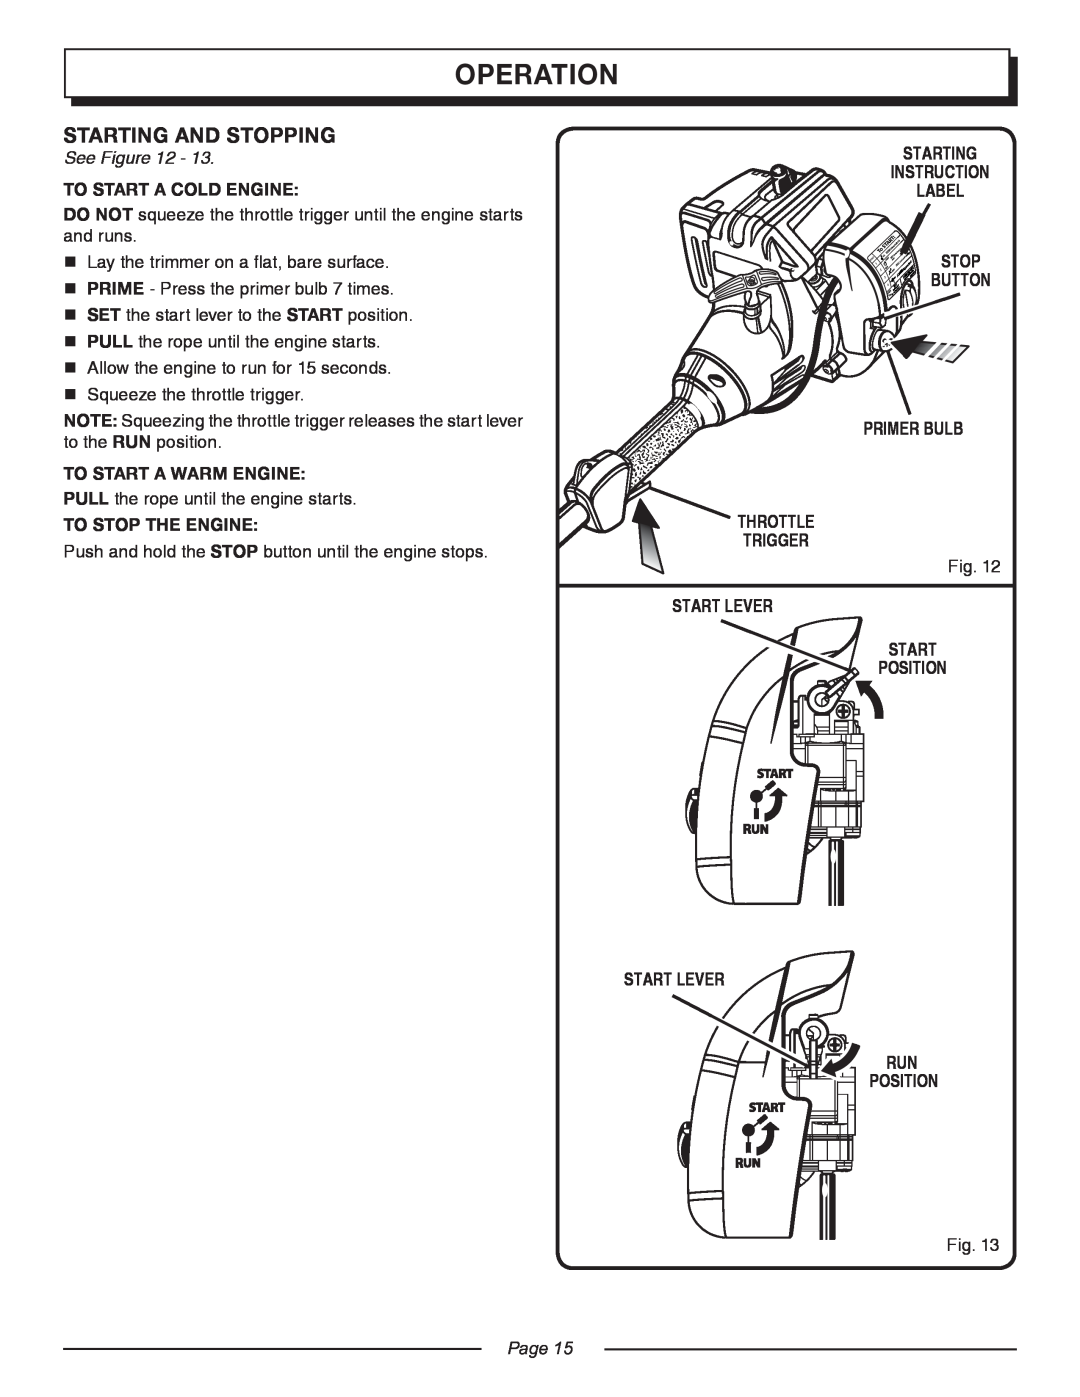 Homelite UT20025, UT20044 Starting And Stopping, Operation, See Figure, To Start A Cold Engine, To Stop The Engine, Page 